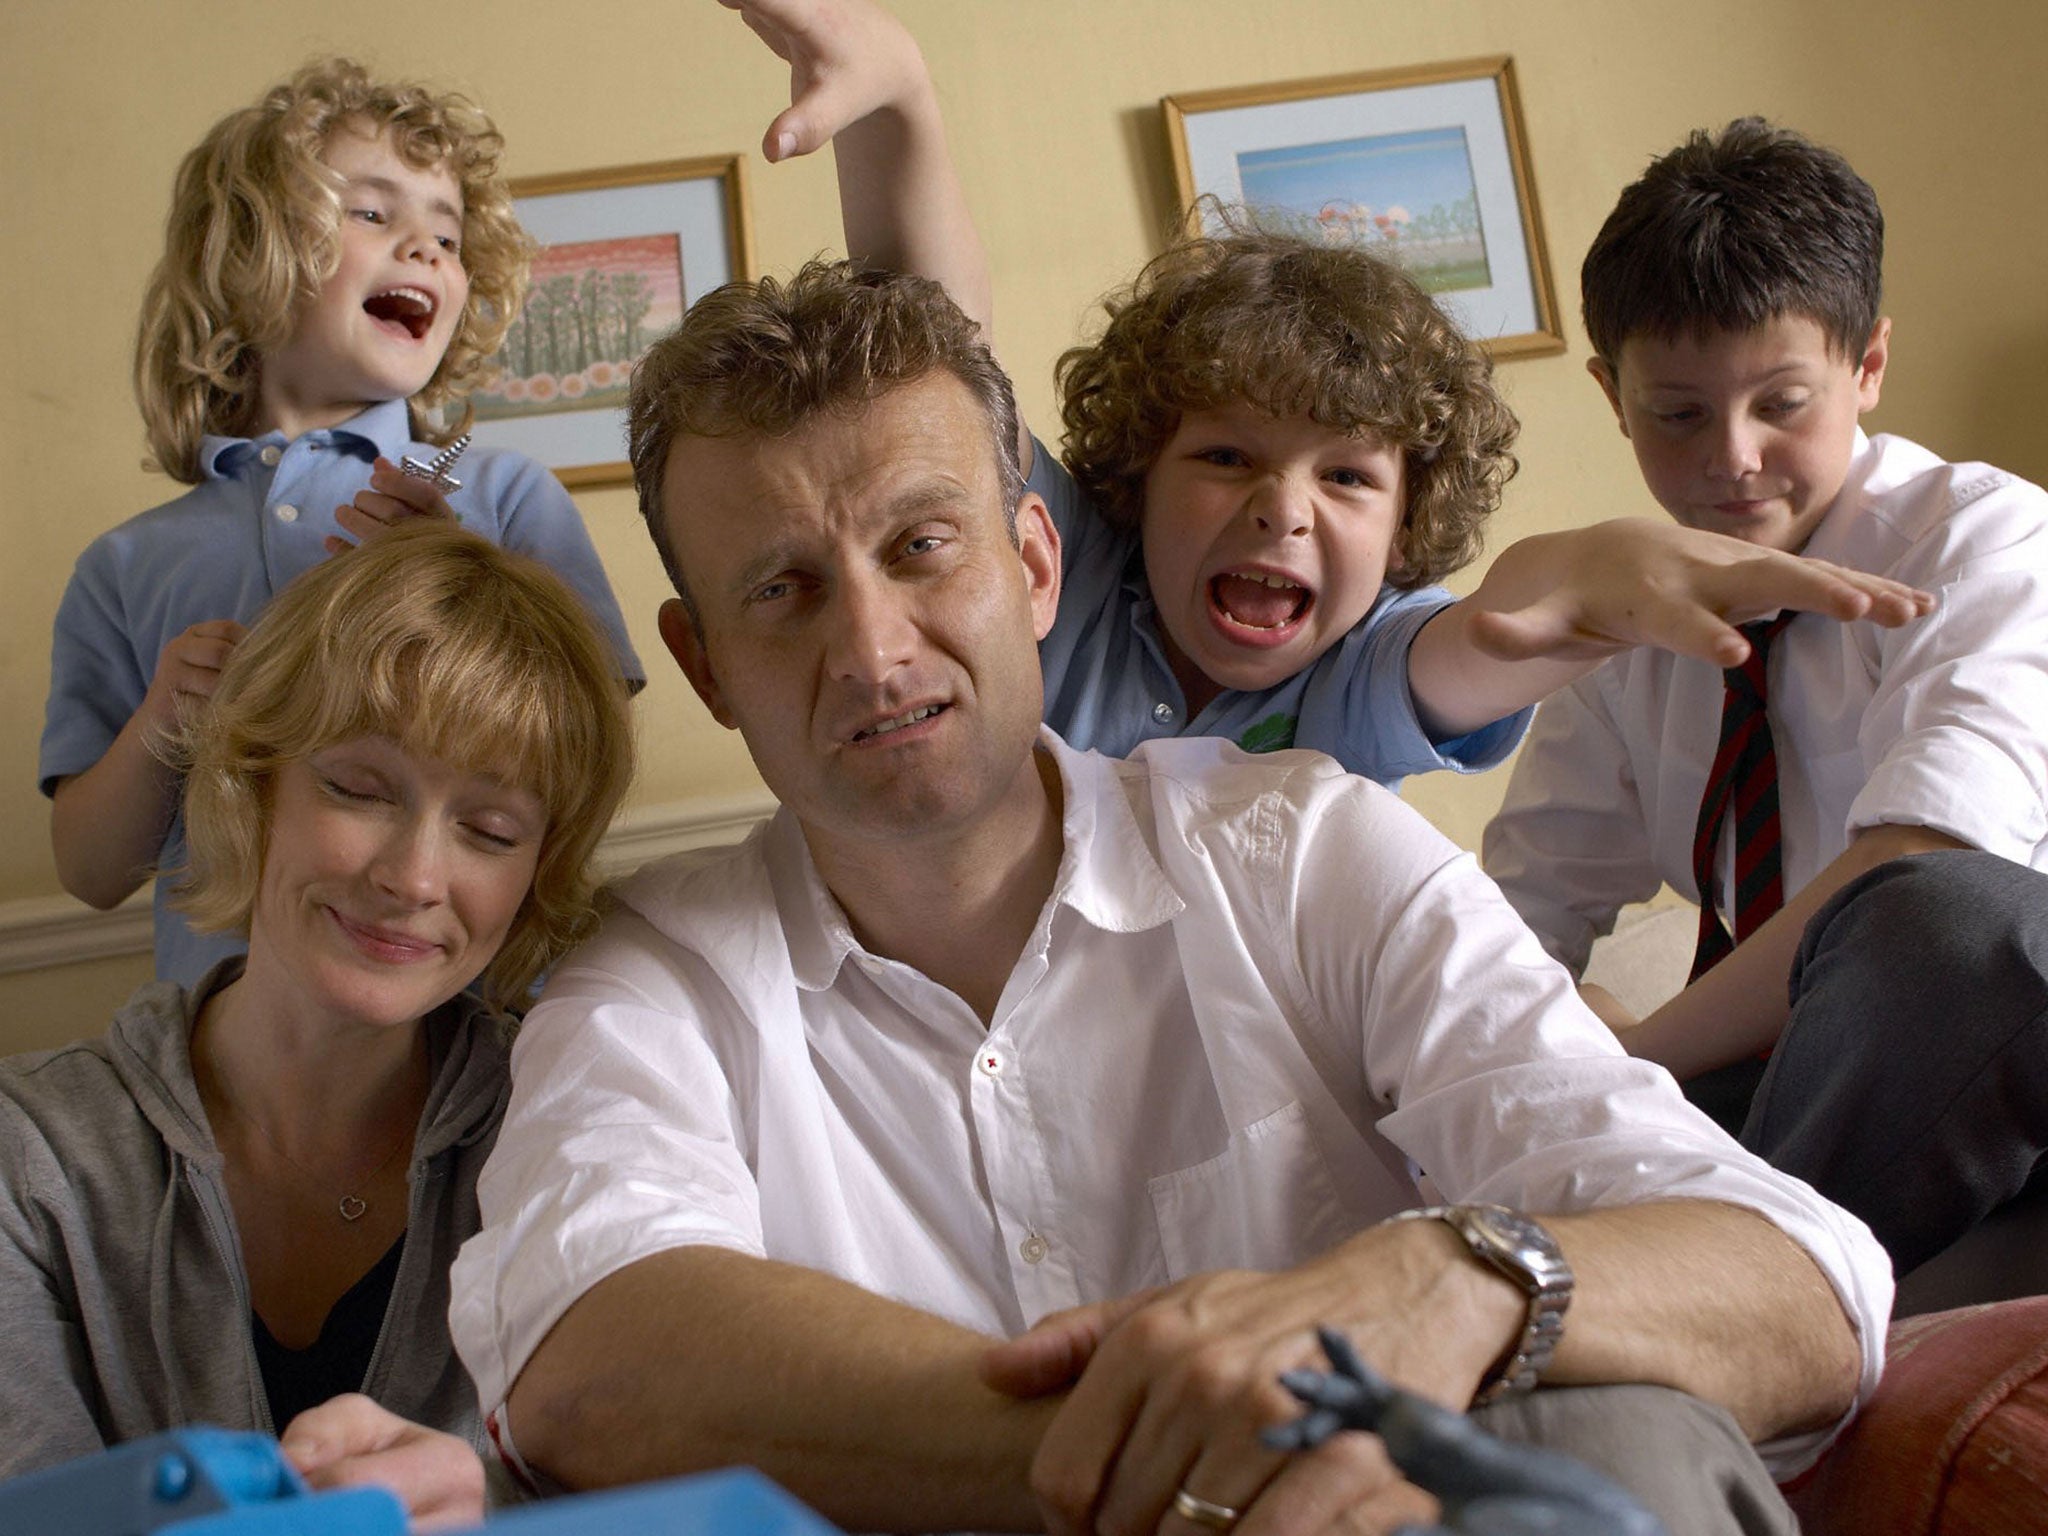 Outnumbered' couple Hugh Dennis and Claire Skinner in real life relati...